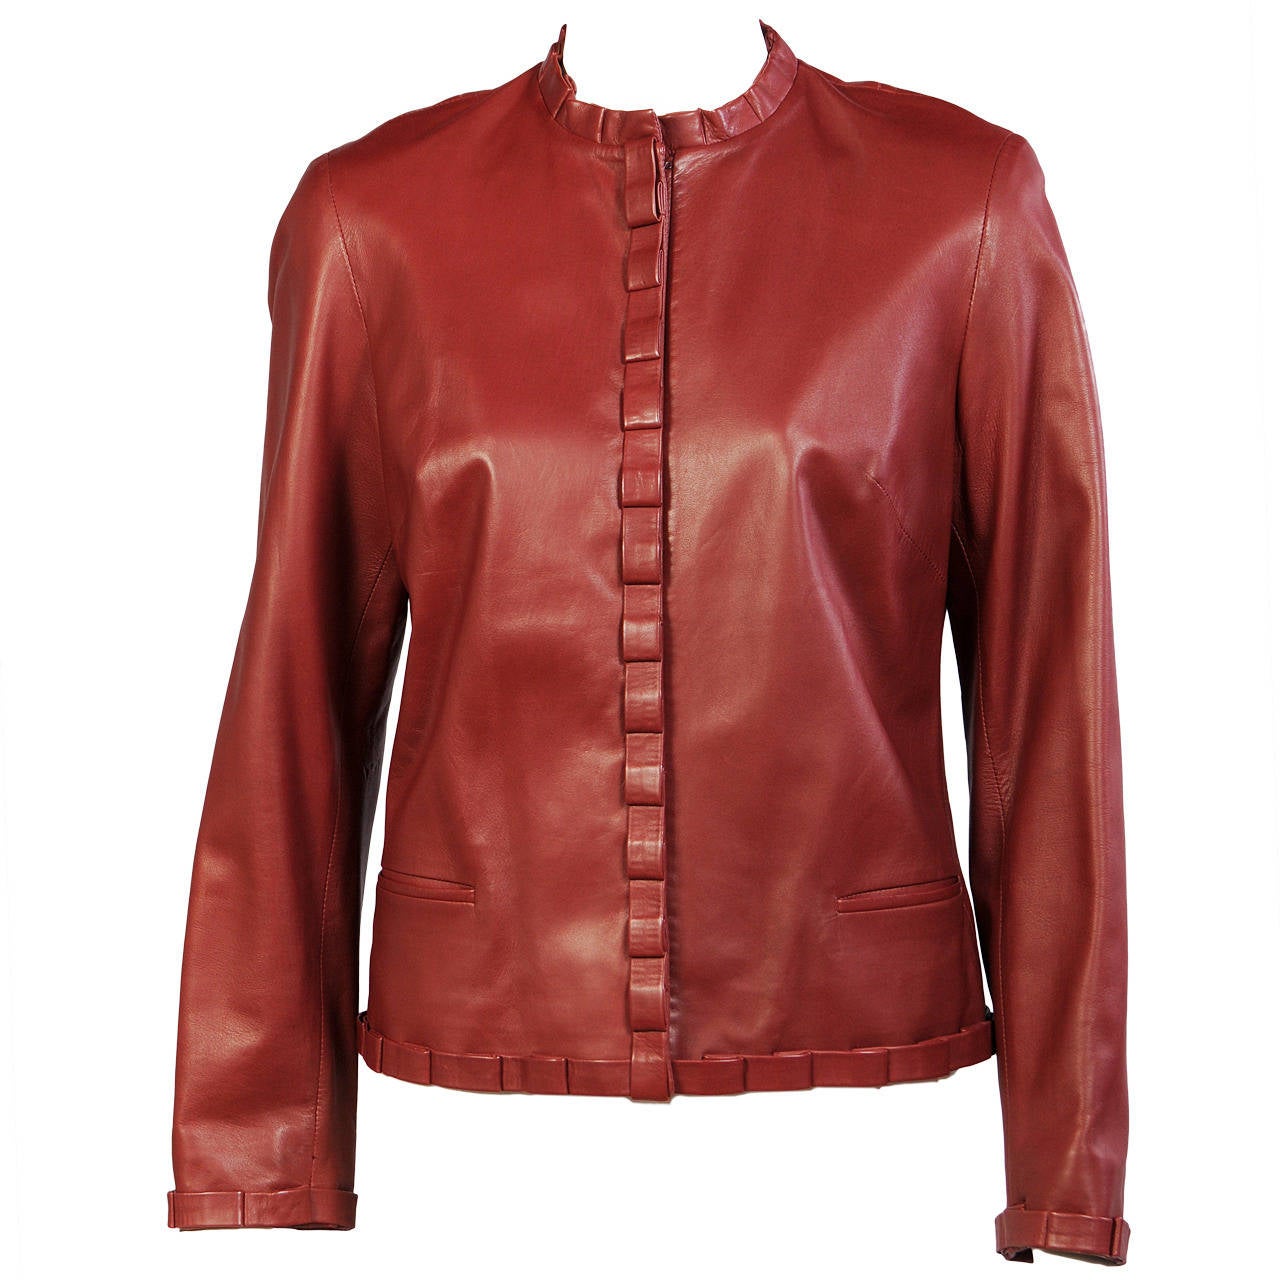 Carolina Herrera Buttery Soft Red Leather Jacket For Sale at 1stdibs